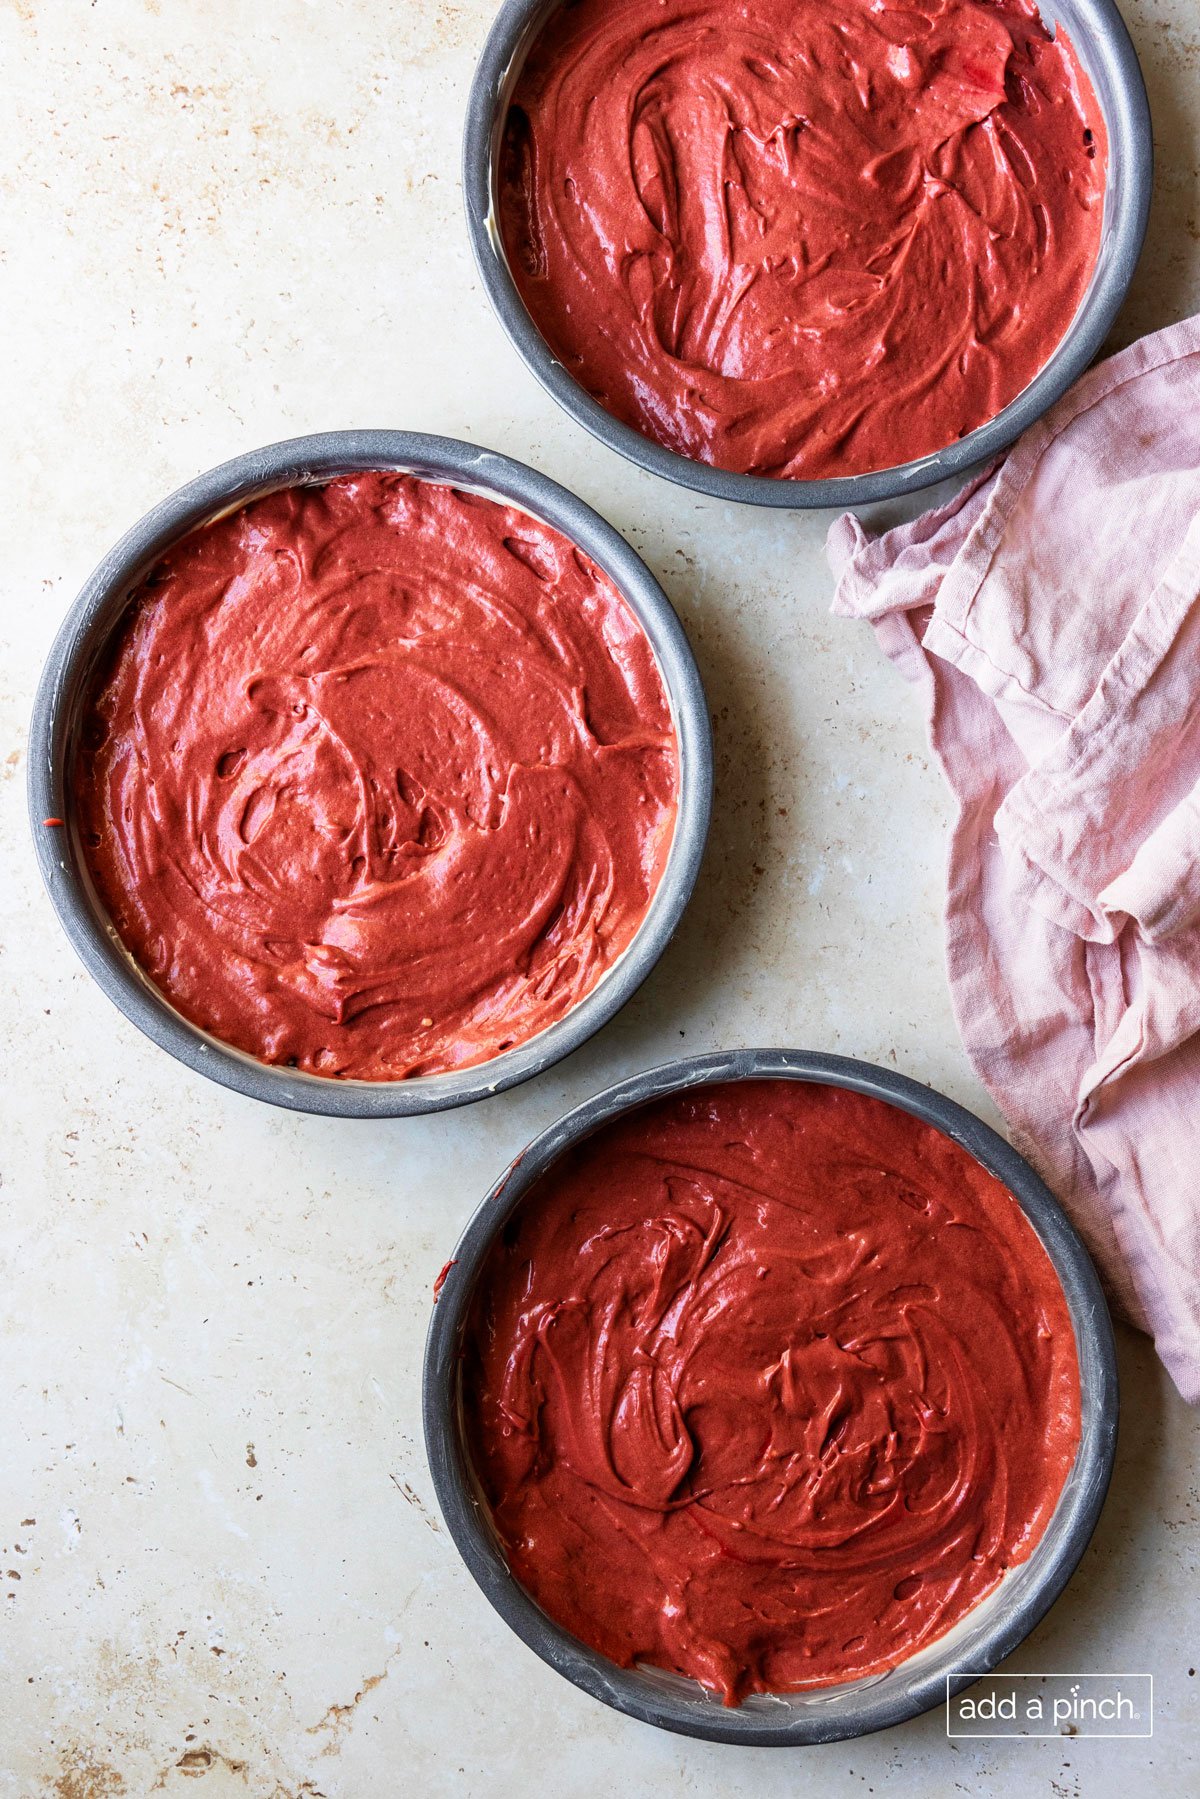 Photograph of red velvet cake recipe batter evenly distributed in three cake pans.